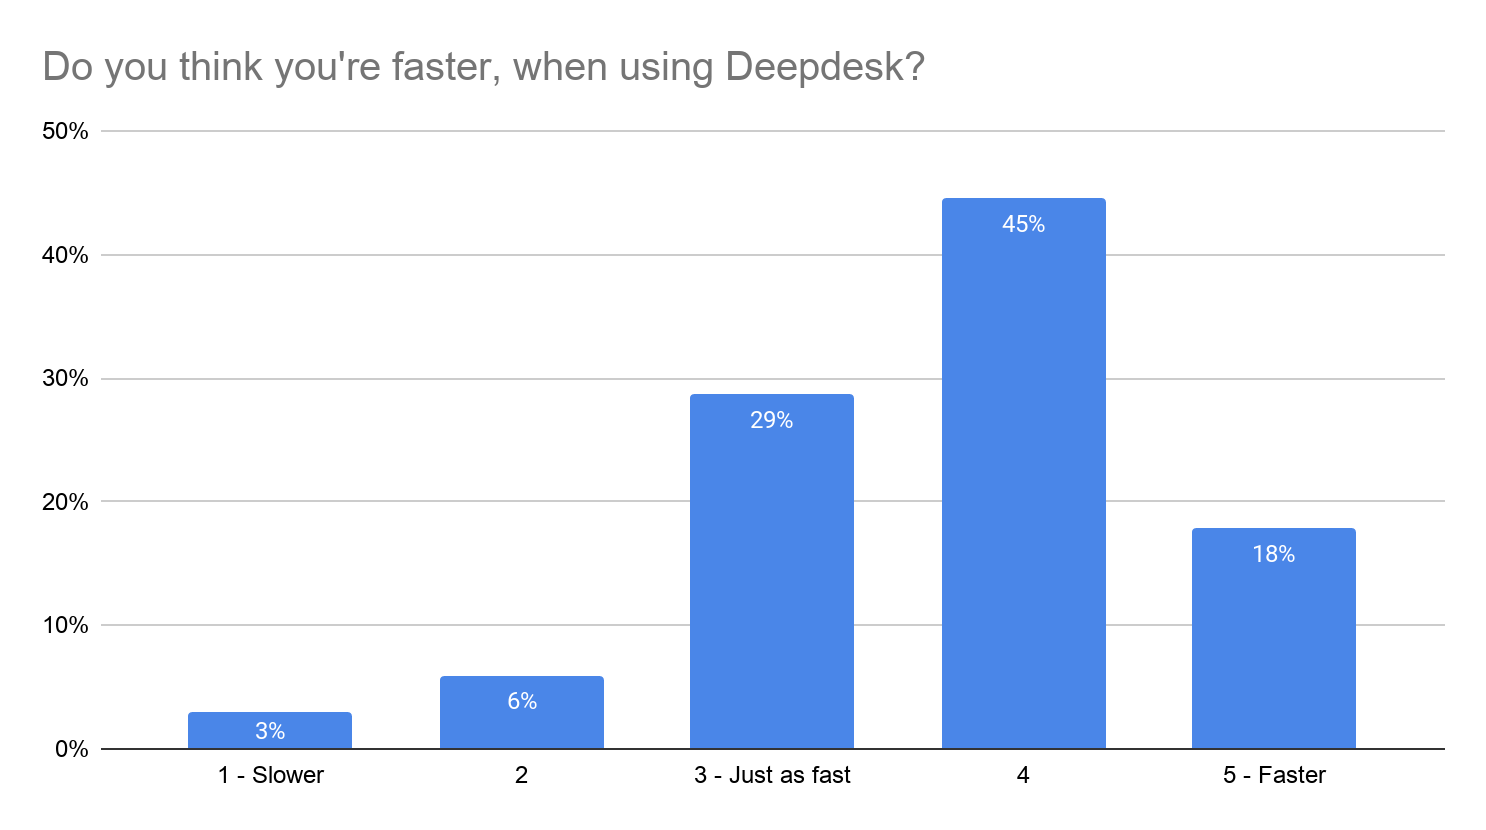 Agents say Deepdesk makes them work faster